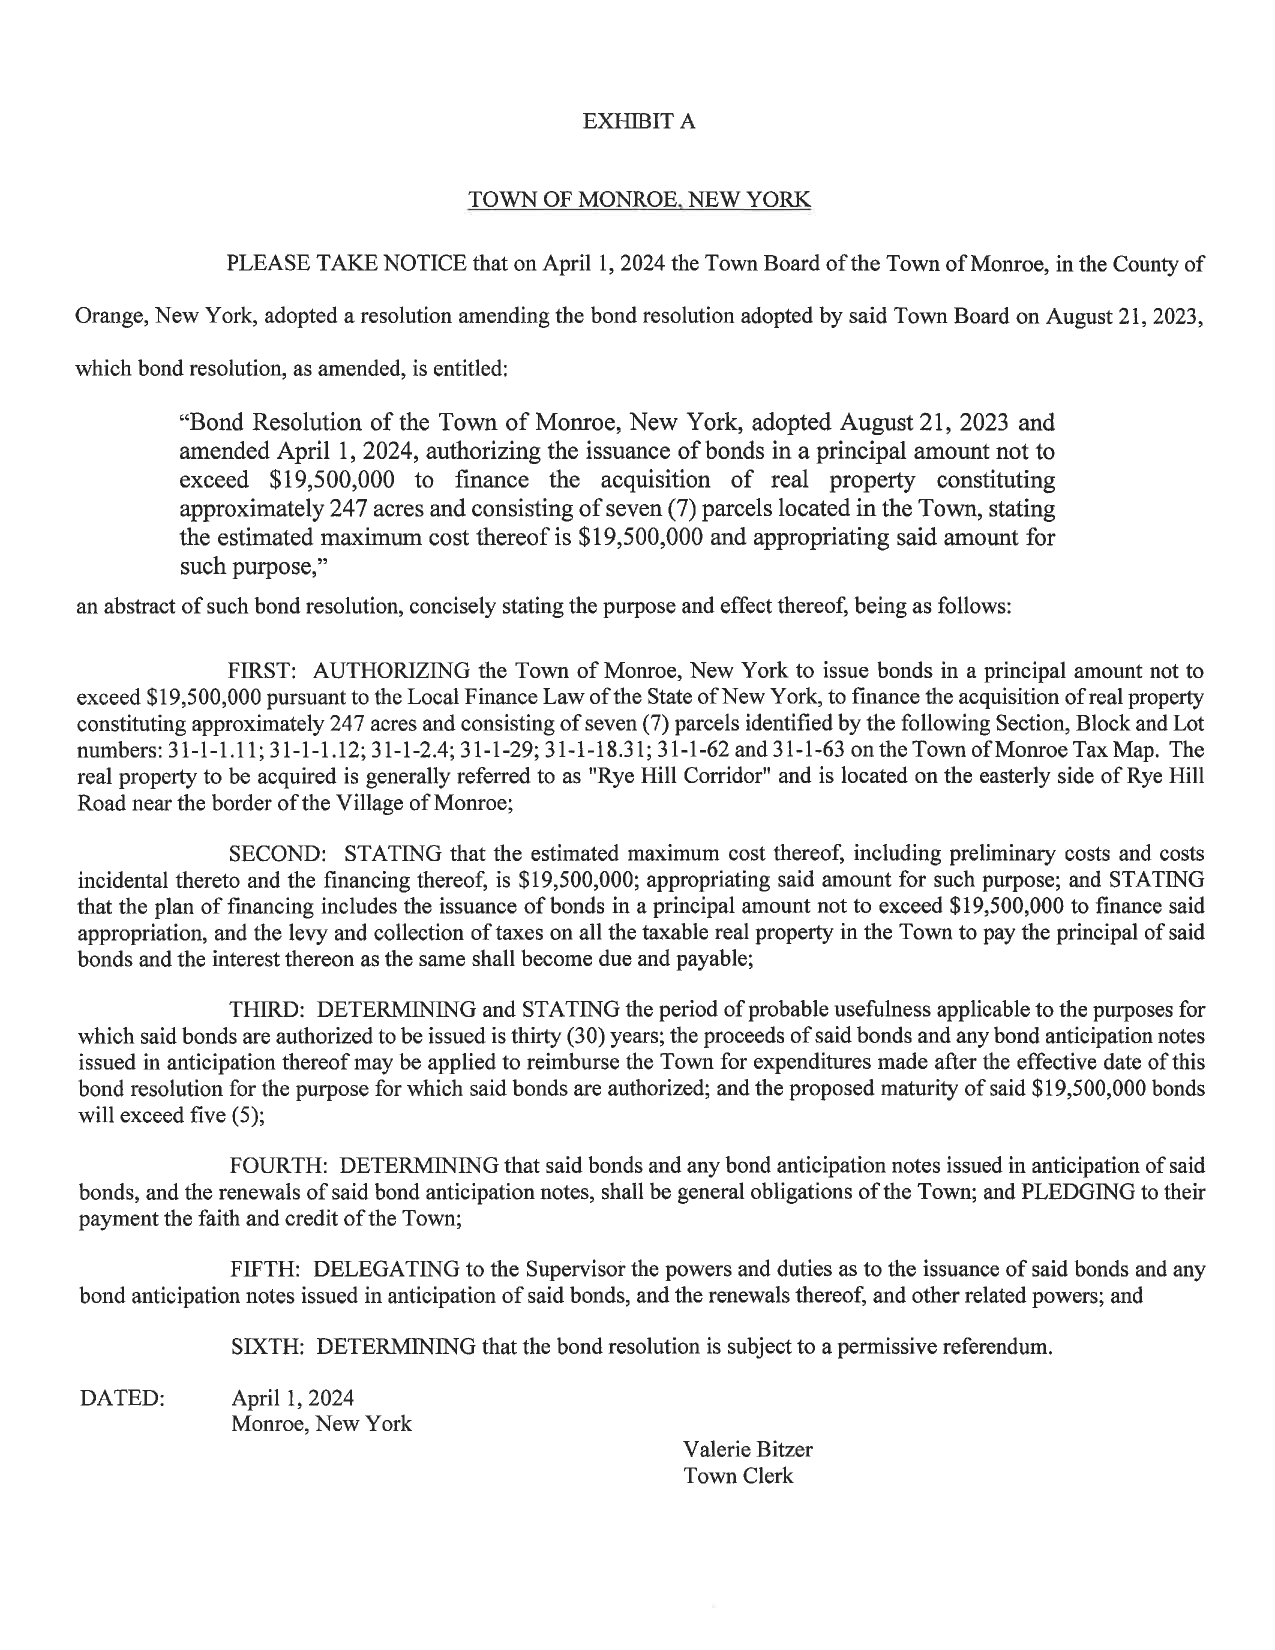 Notice for Publication RE Bond Resolution Amendment, Acquisition of Real Property, Rye Hill Corridor_page-0001.jpg